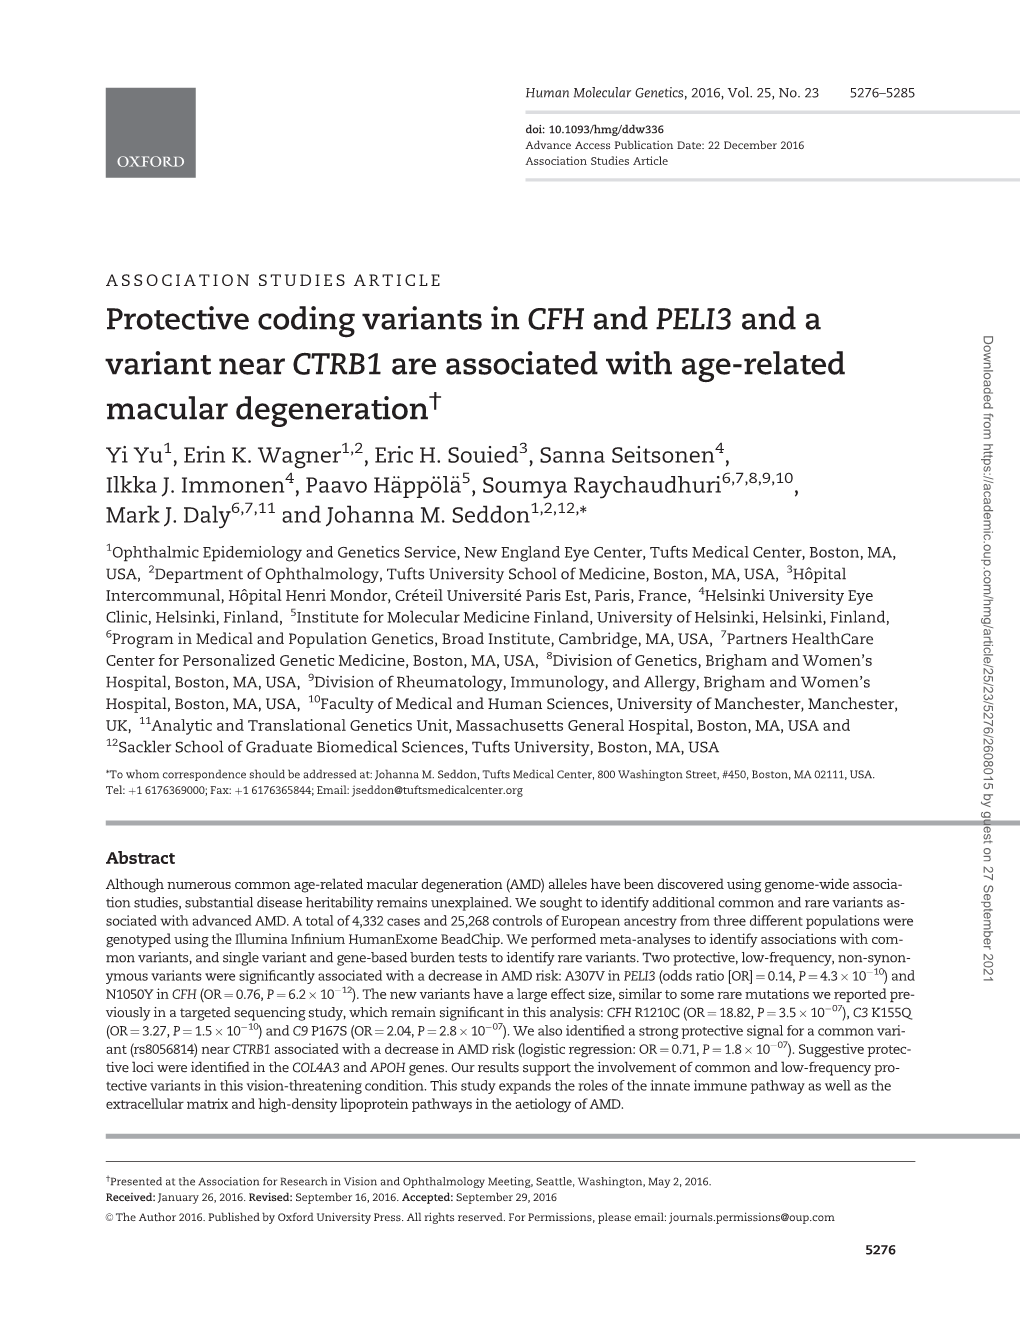 Protective Coding Variants in CFH and PELI3 and a Variant Near CTRB1